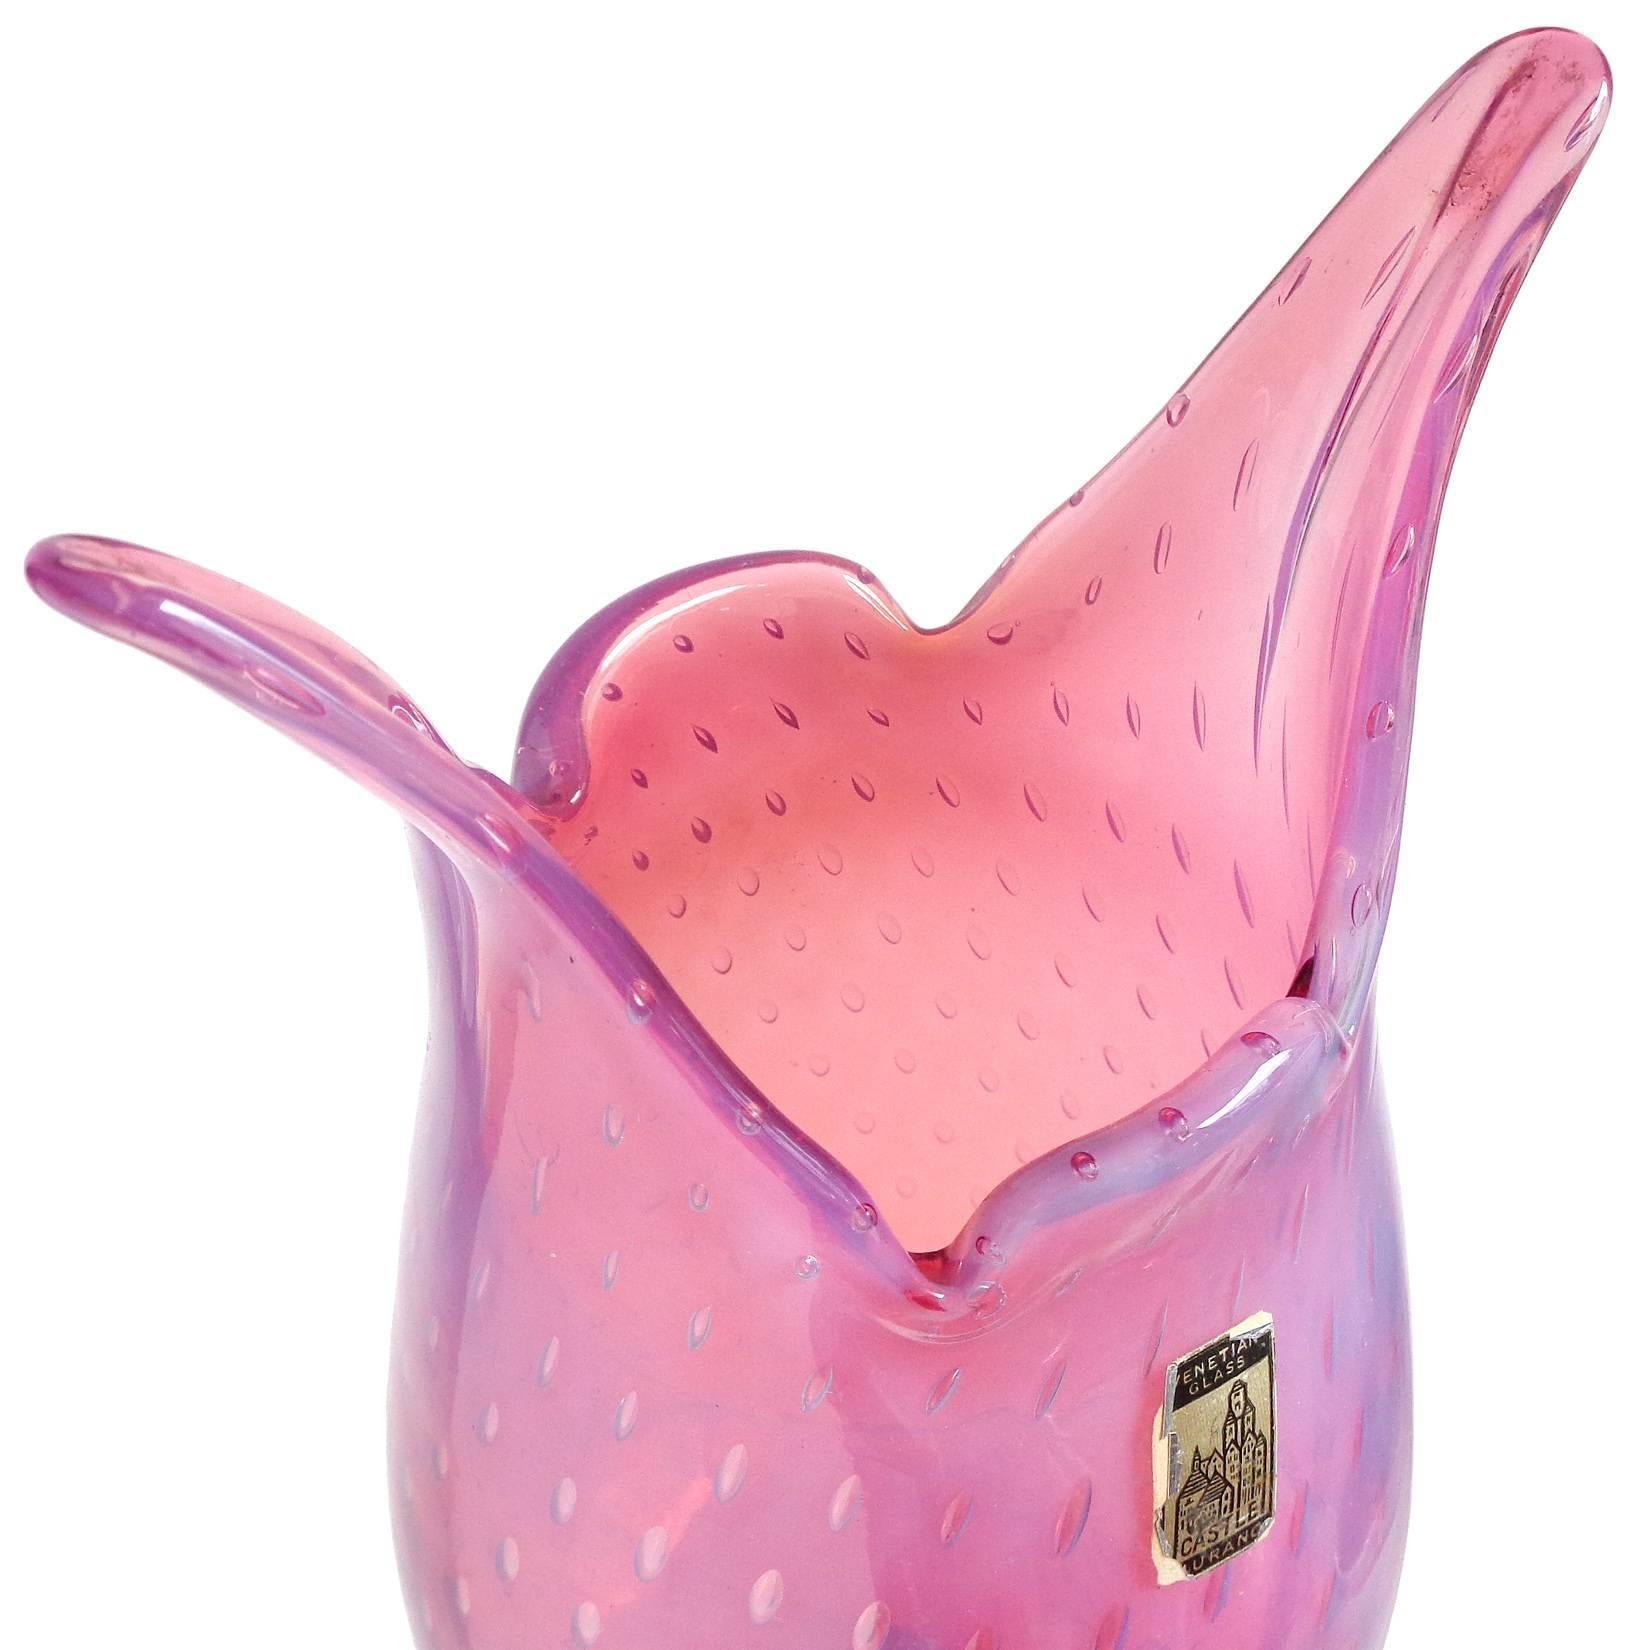 Beautiful vintage Murano hand blown opalescent pink and controlled bubbles Italian art glass flower vase. Documented to the Fratelli Toso company. It still retains two original labels, as shown. There is a 